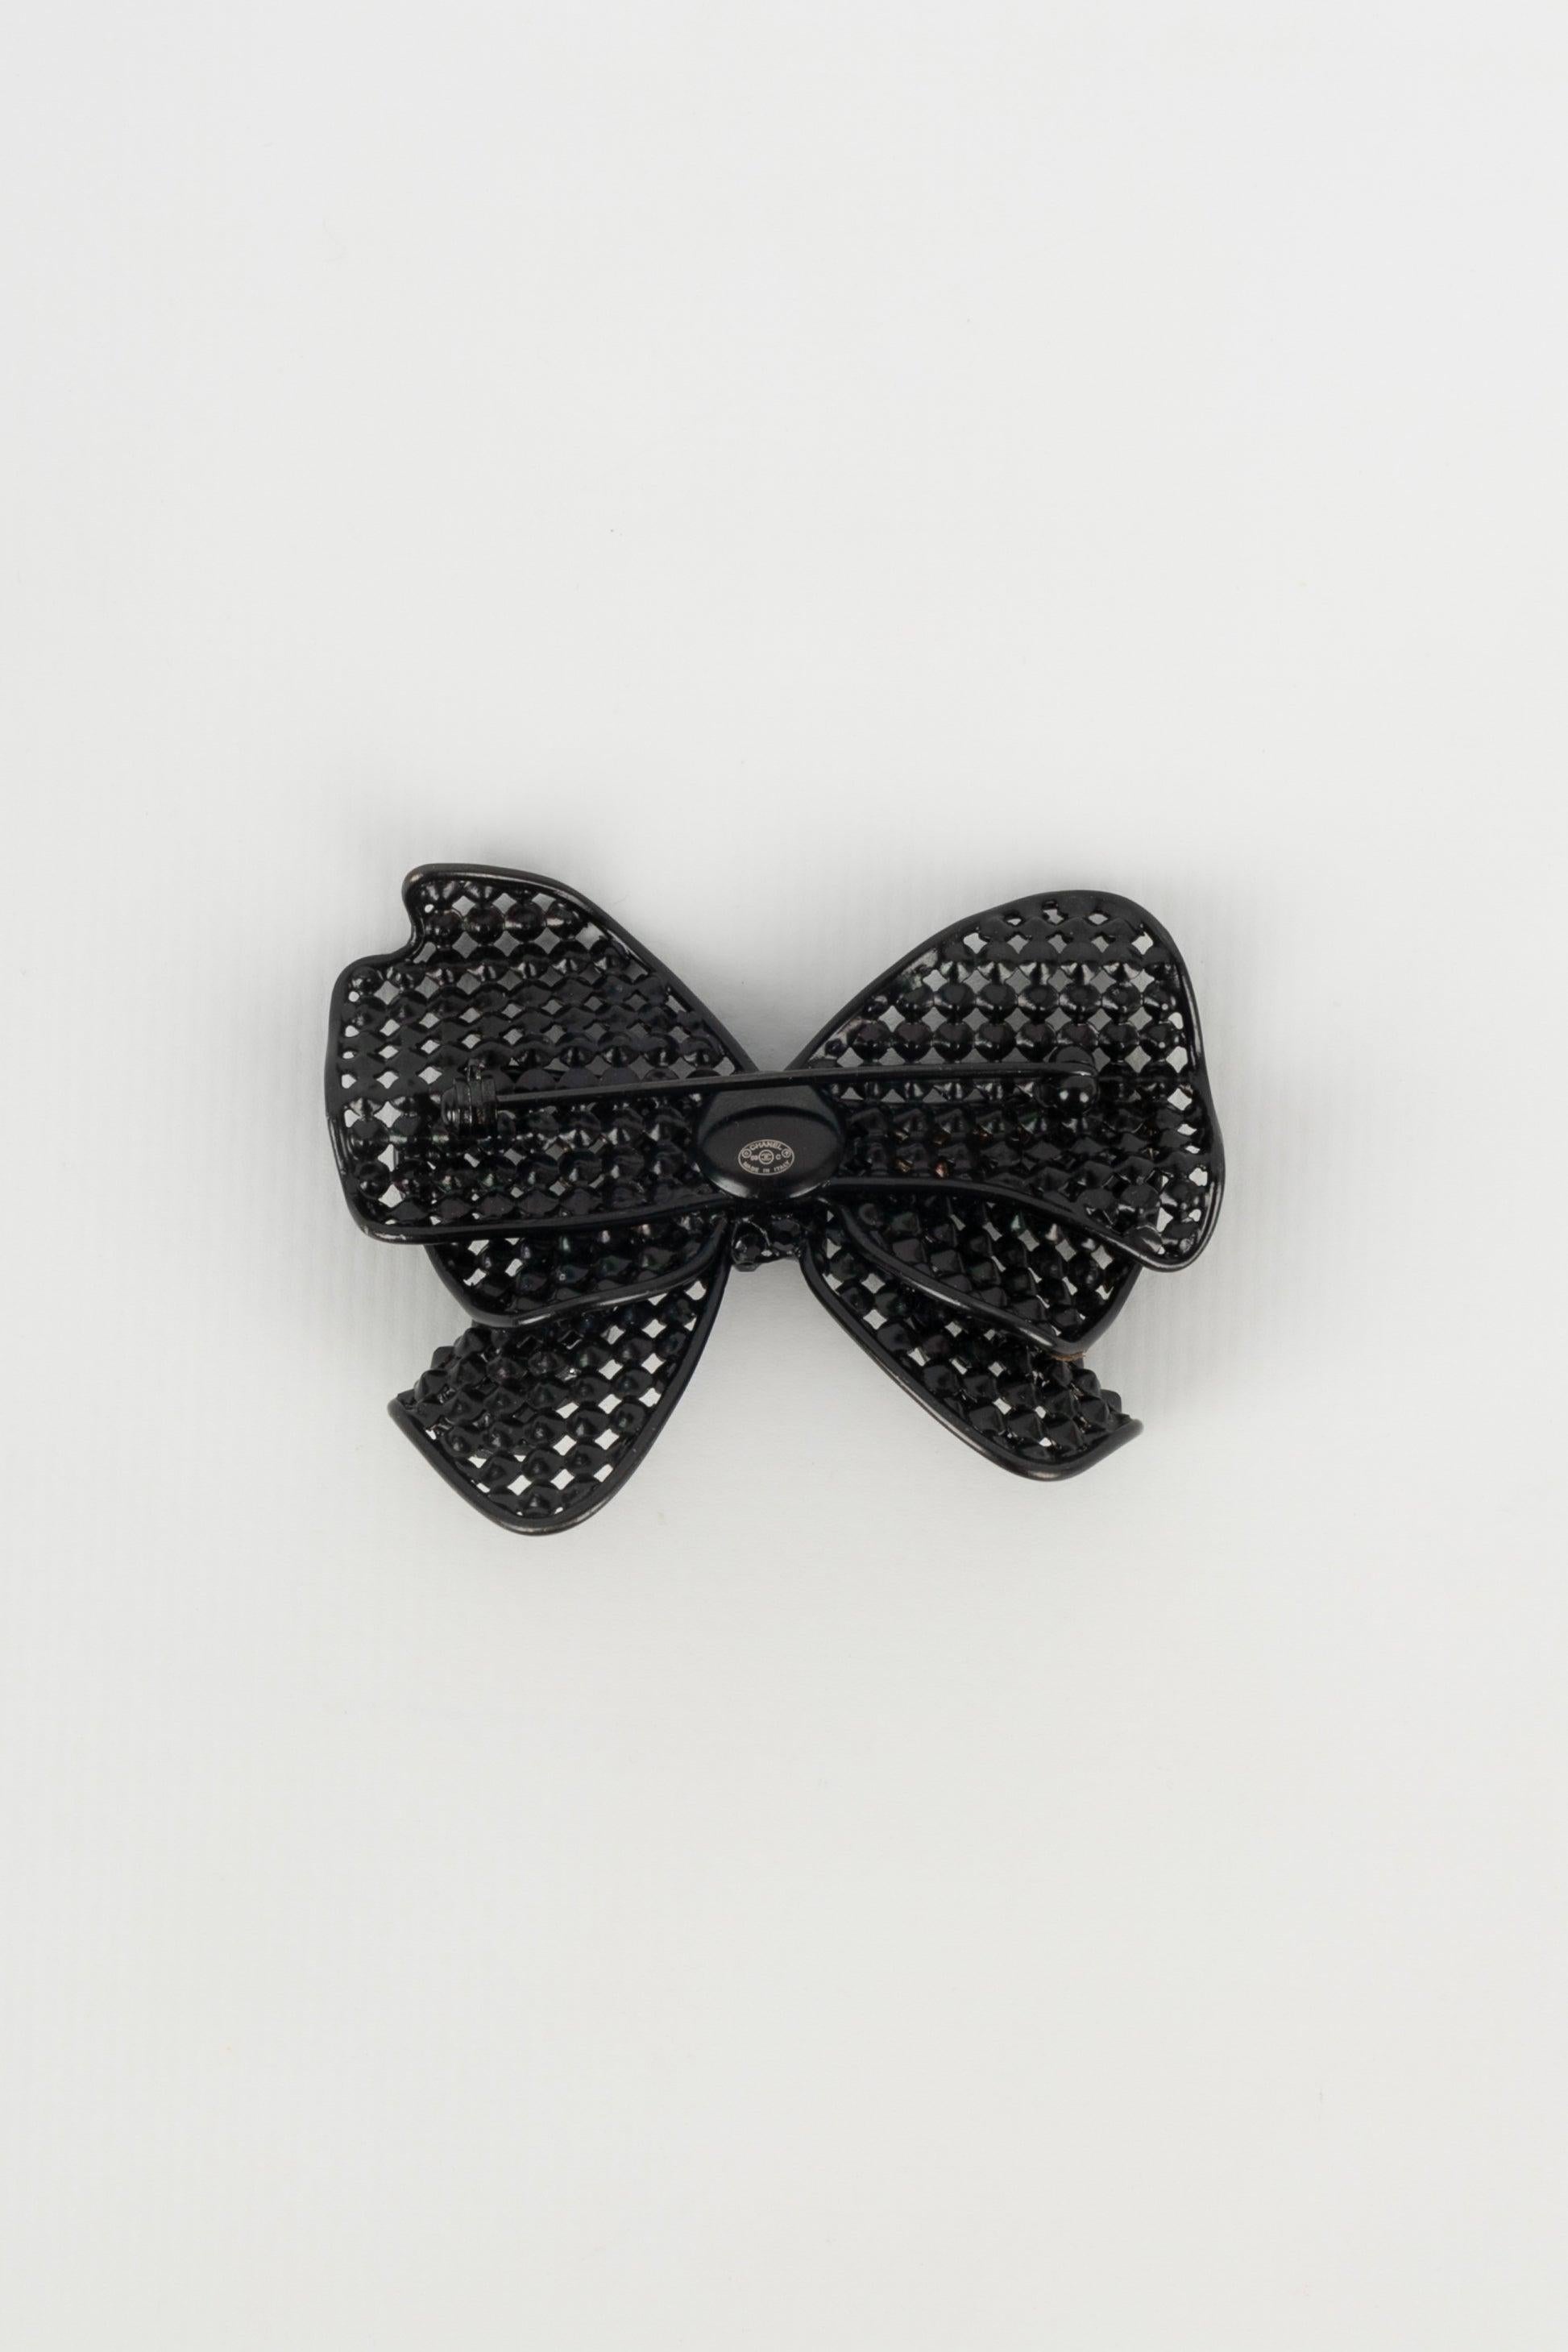 Chanel - (Made in Italy) Black metal brooch representing a bow ornamented with black rhinestones. Cruise 2009 Collection.

Additional information:
Condition: Very good condition
Dimensions: Length: 5.5 cm
Period: 21st Century

Seller Reference: